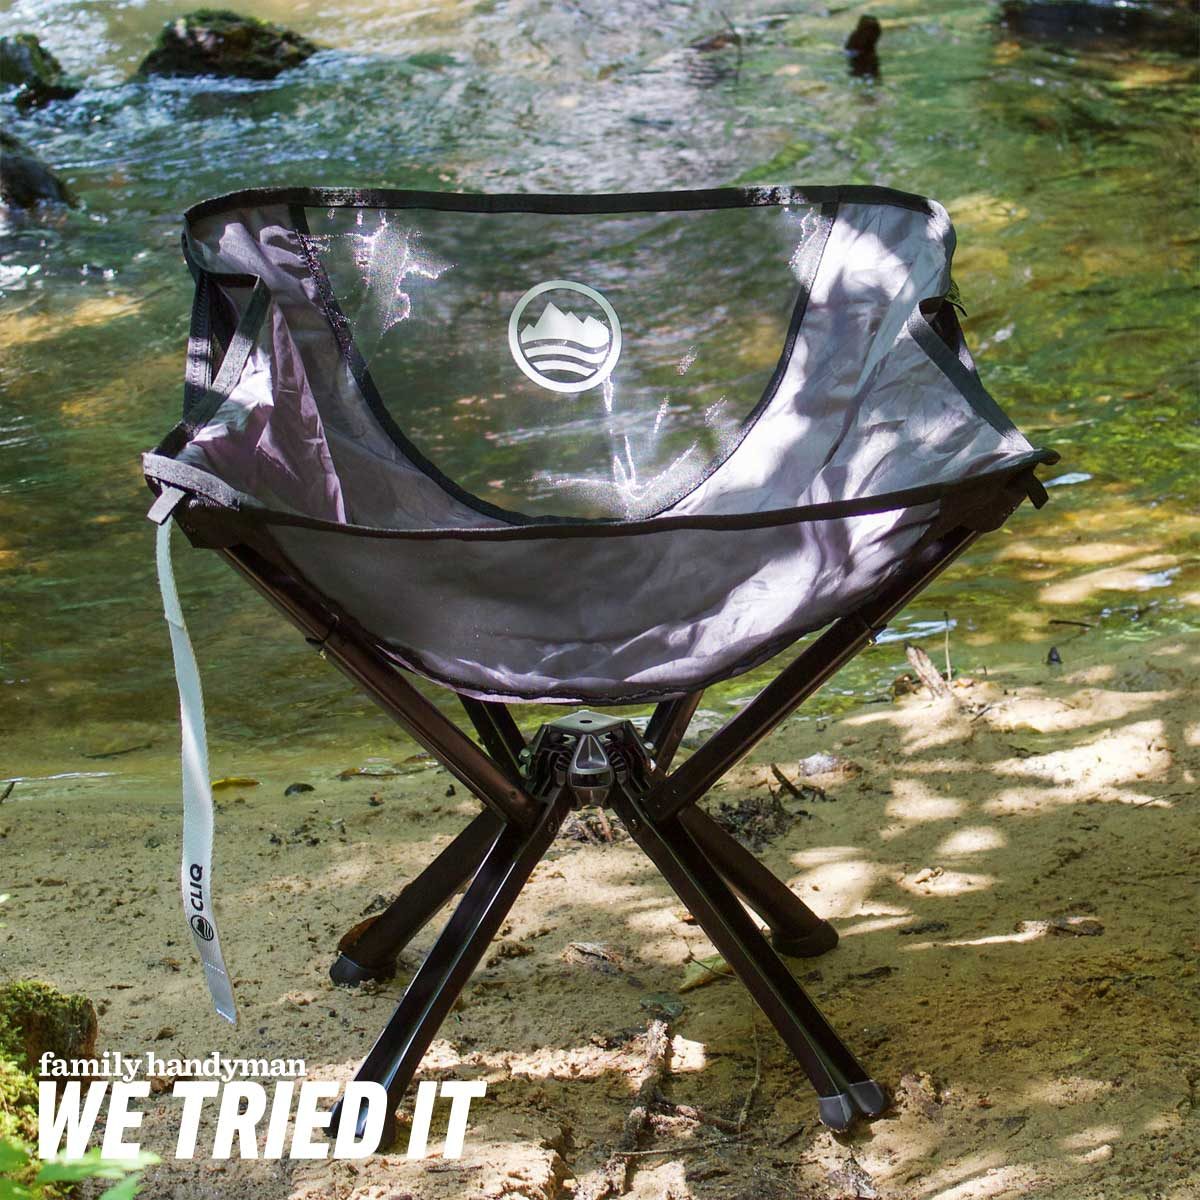 CLIQ Chair Review: The Ultimate Portable Outdoor Seating Solution? (We Tried It!)